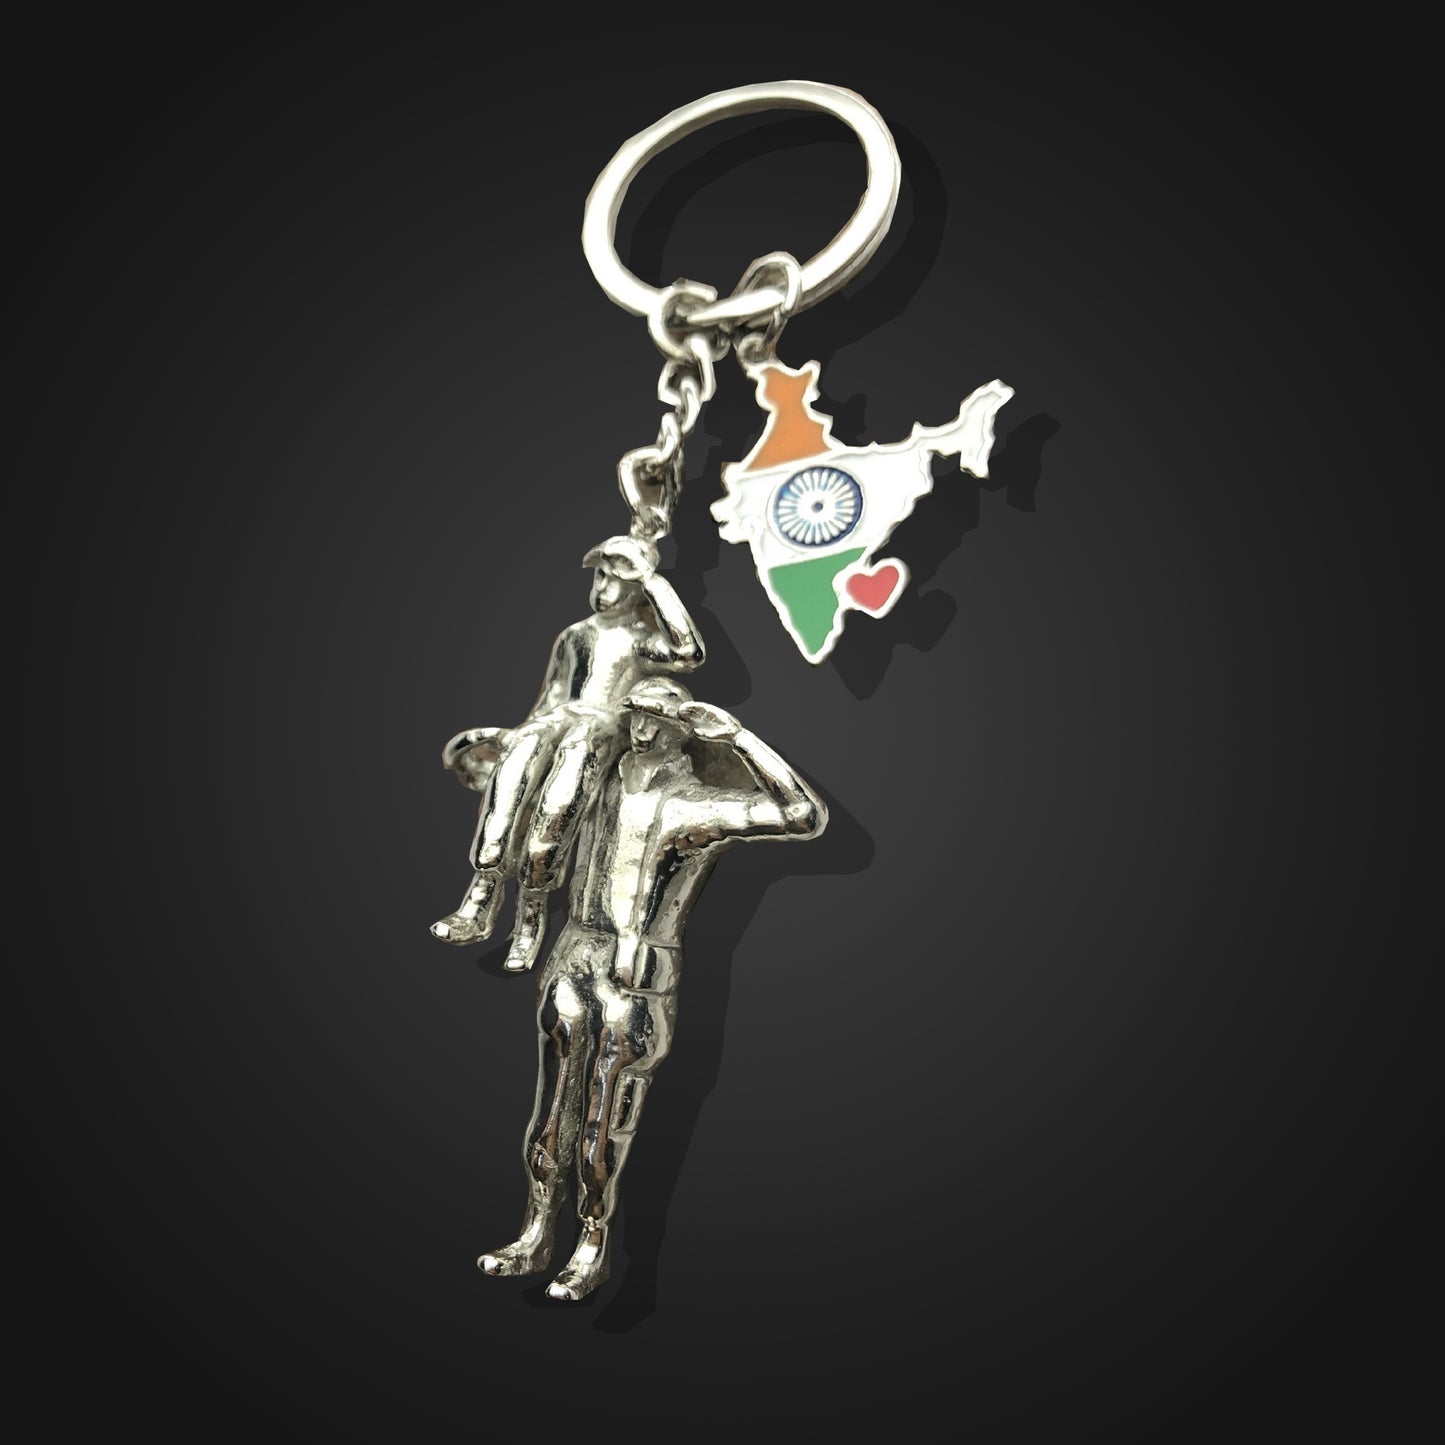 MM 180 | STANDING SOLDIER WITH SON | KEYCHAIN